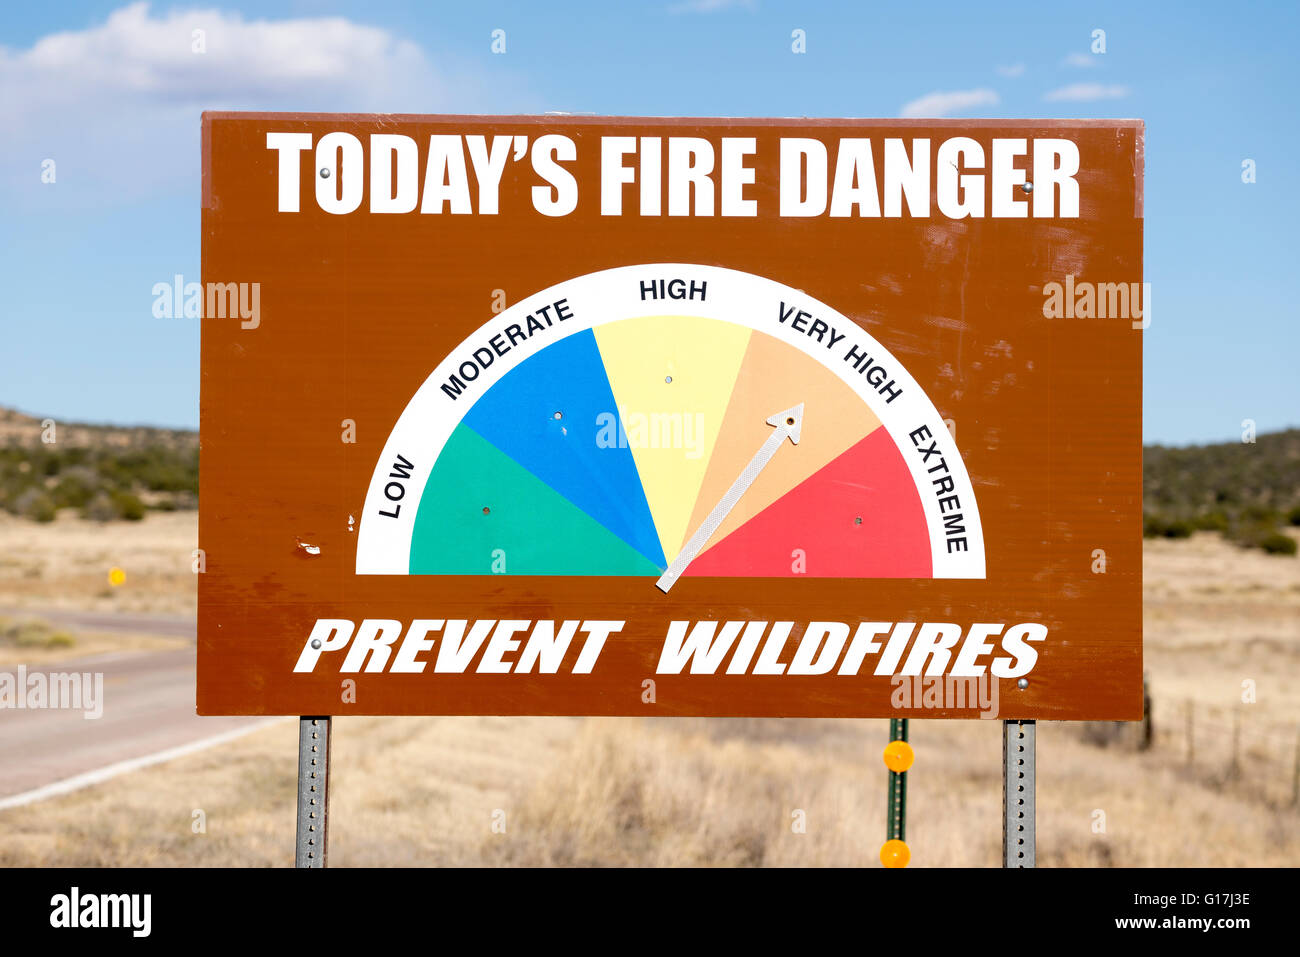 Fire danger sign in Cibola County, New Mexico. Stock Photo